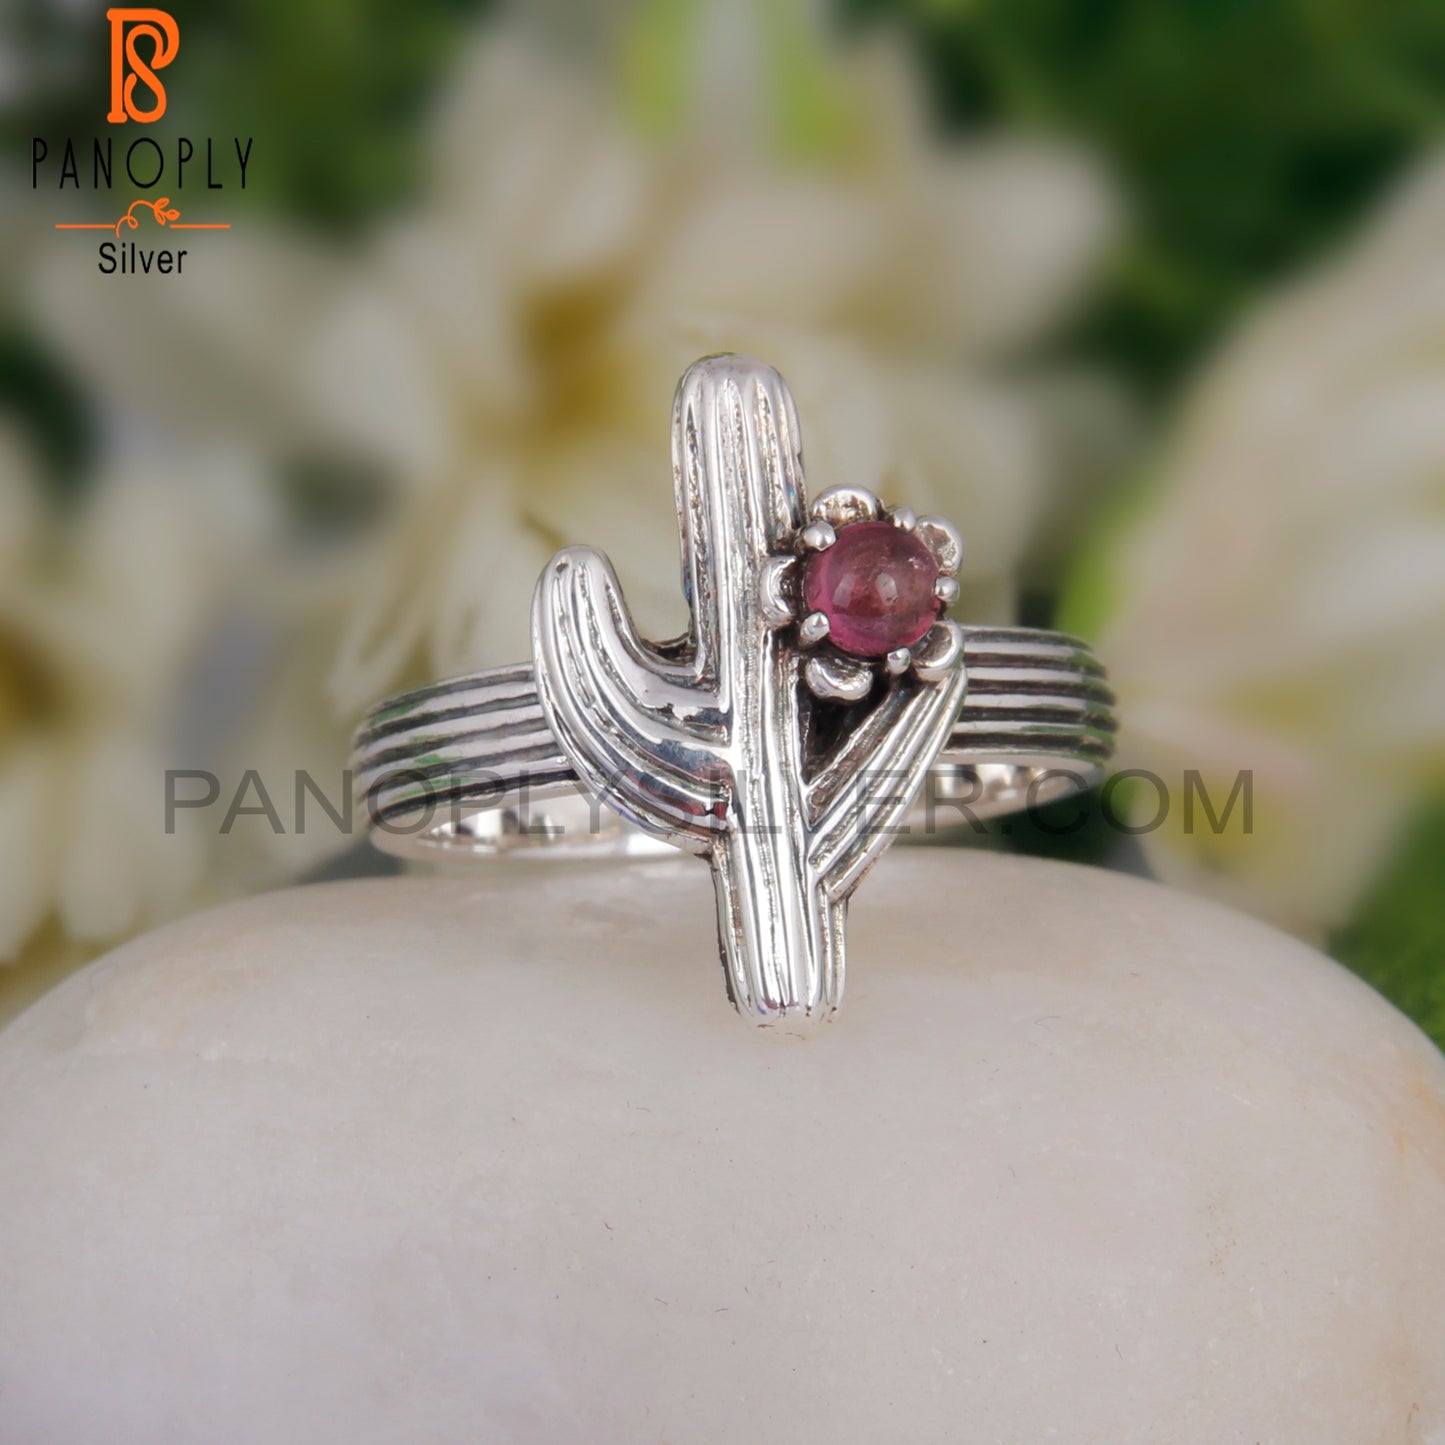 Pink Tourmaline 925 Sterling Silver Cactus Shape Ring